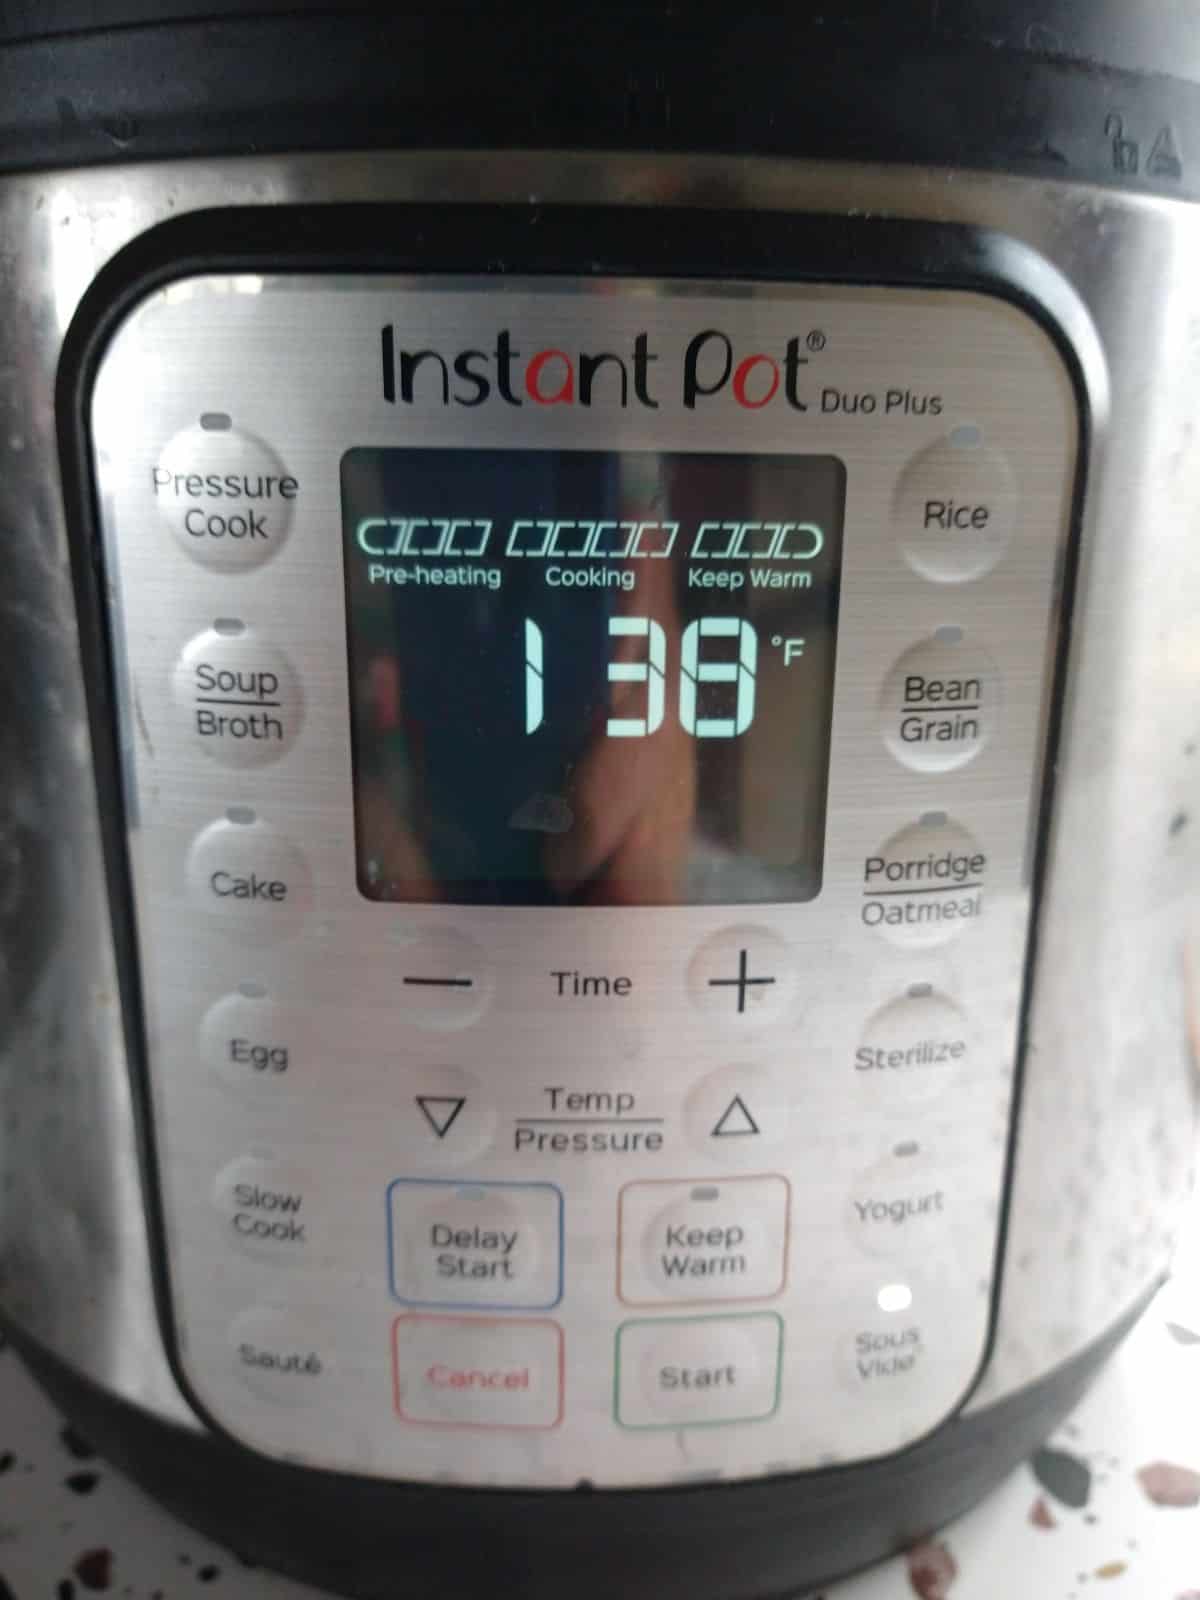 The Instant Pot Duo Plus set to 138 degrees for sous vide cooking.